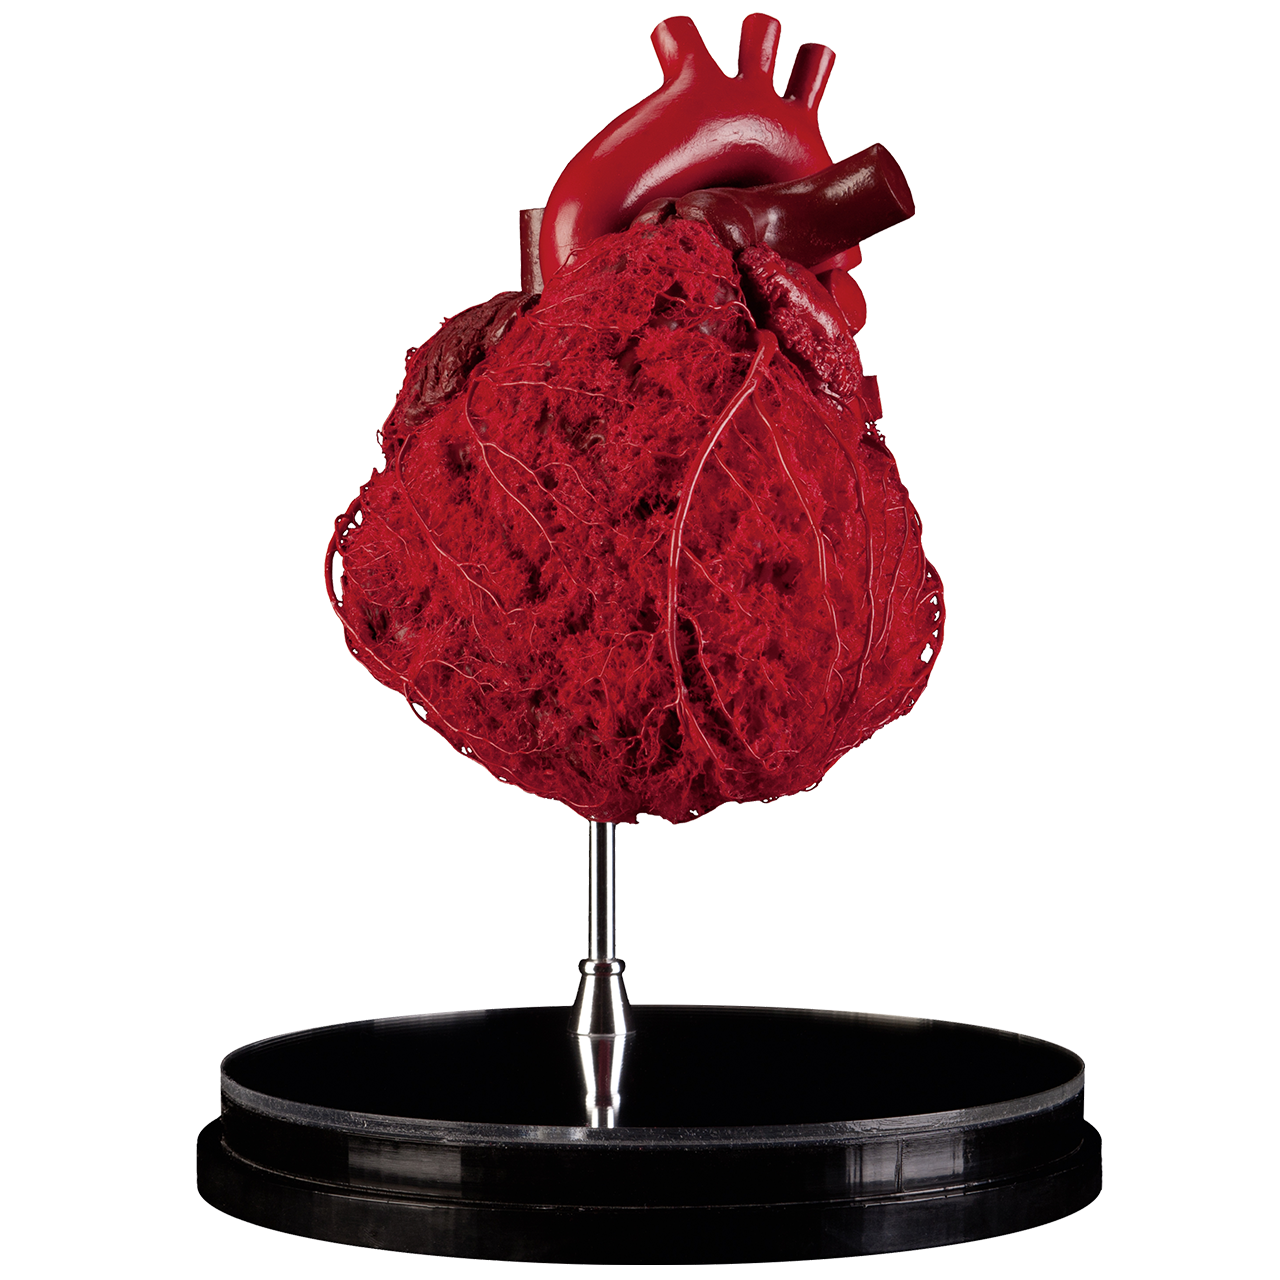 Plastinated blood vessel configuration fo a human heart from Anatomic Excellence and von Hagens Plastination